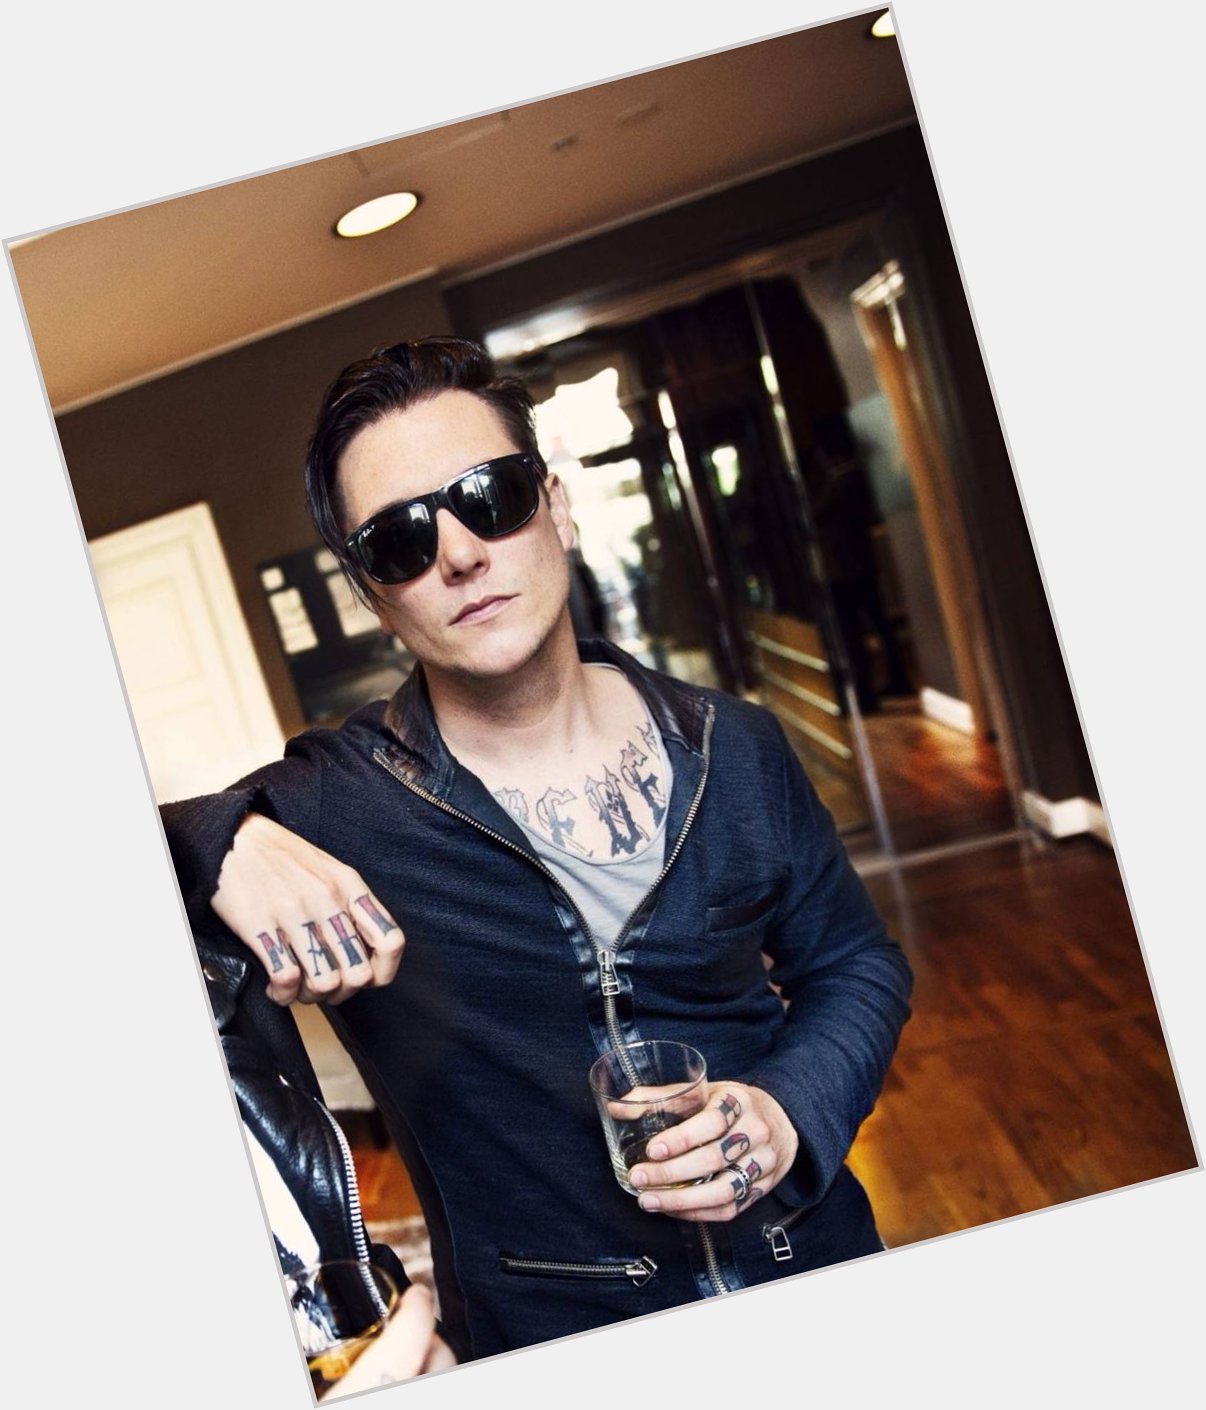 Happy Birthday to my favourite guitarist and one of my many inspirations, Synyster Gates! 